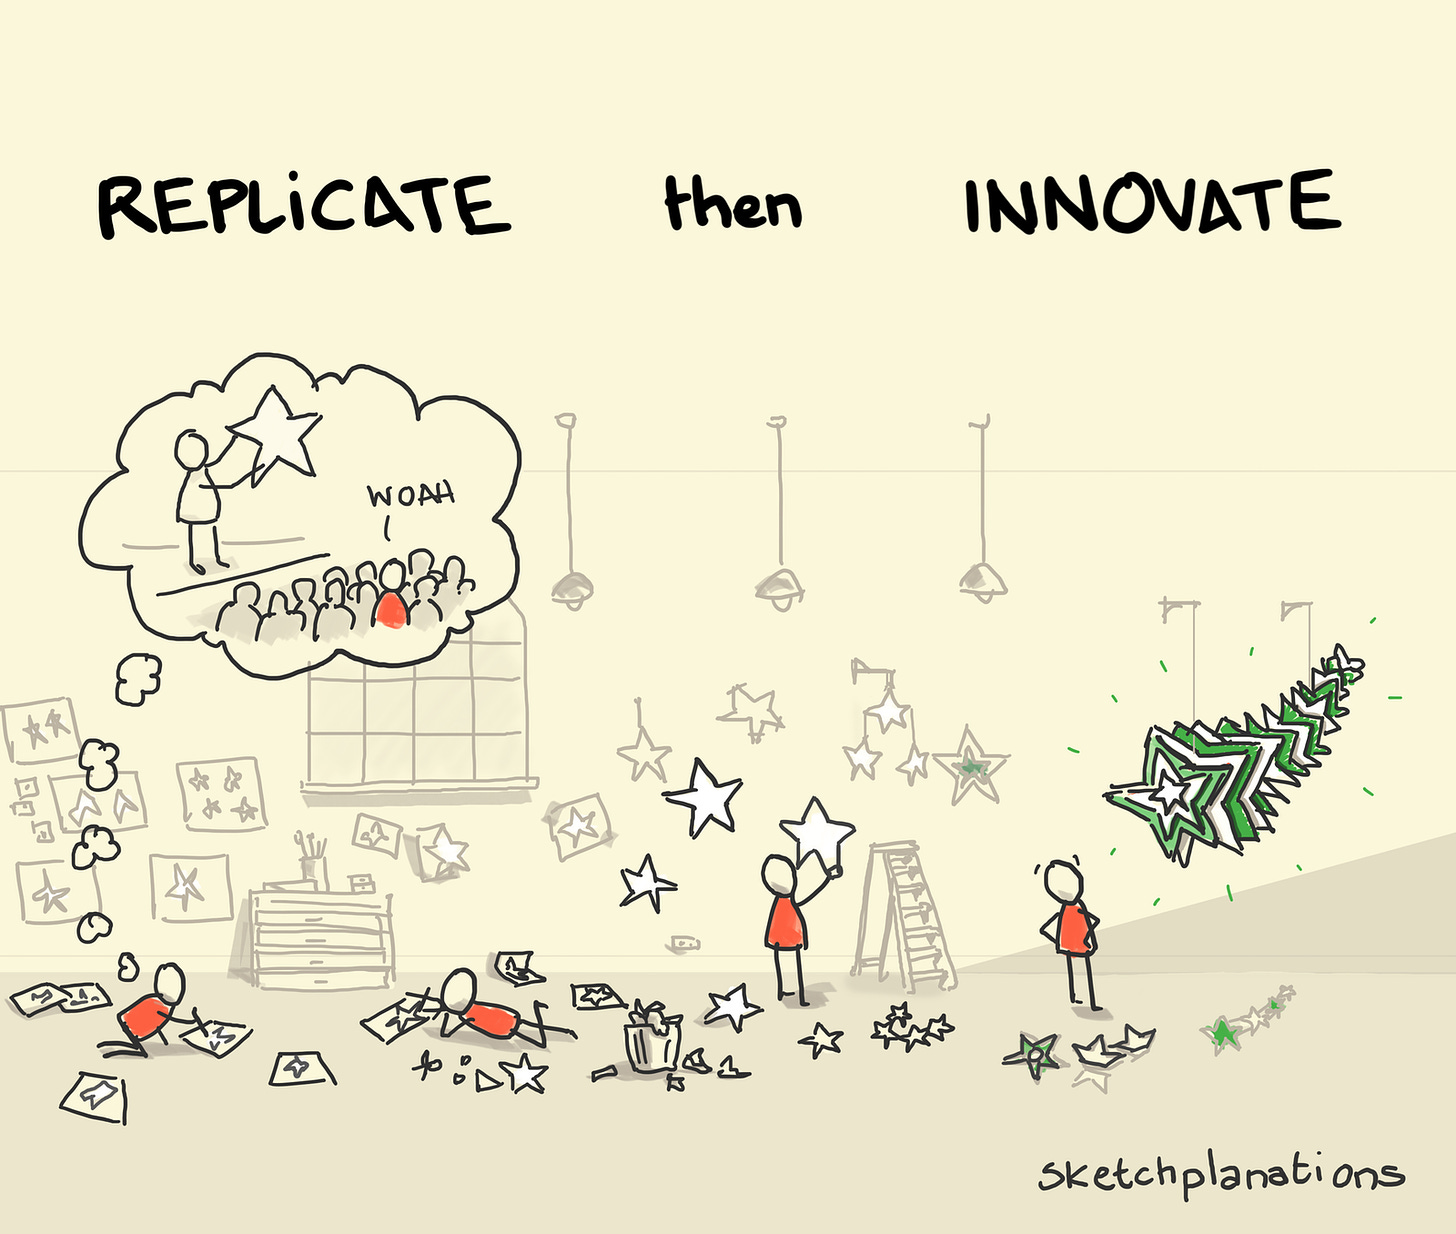 Replicate then innovate - Sketchplanations